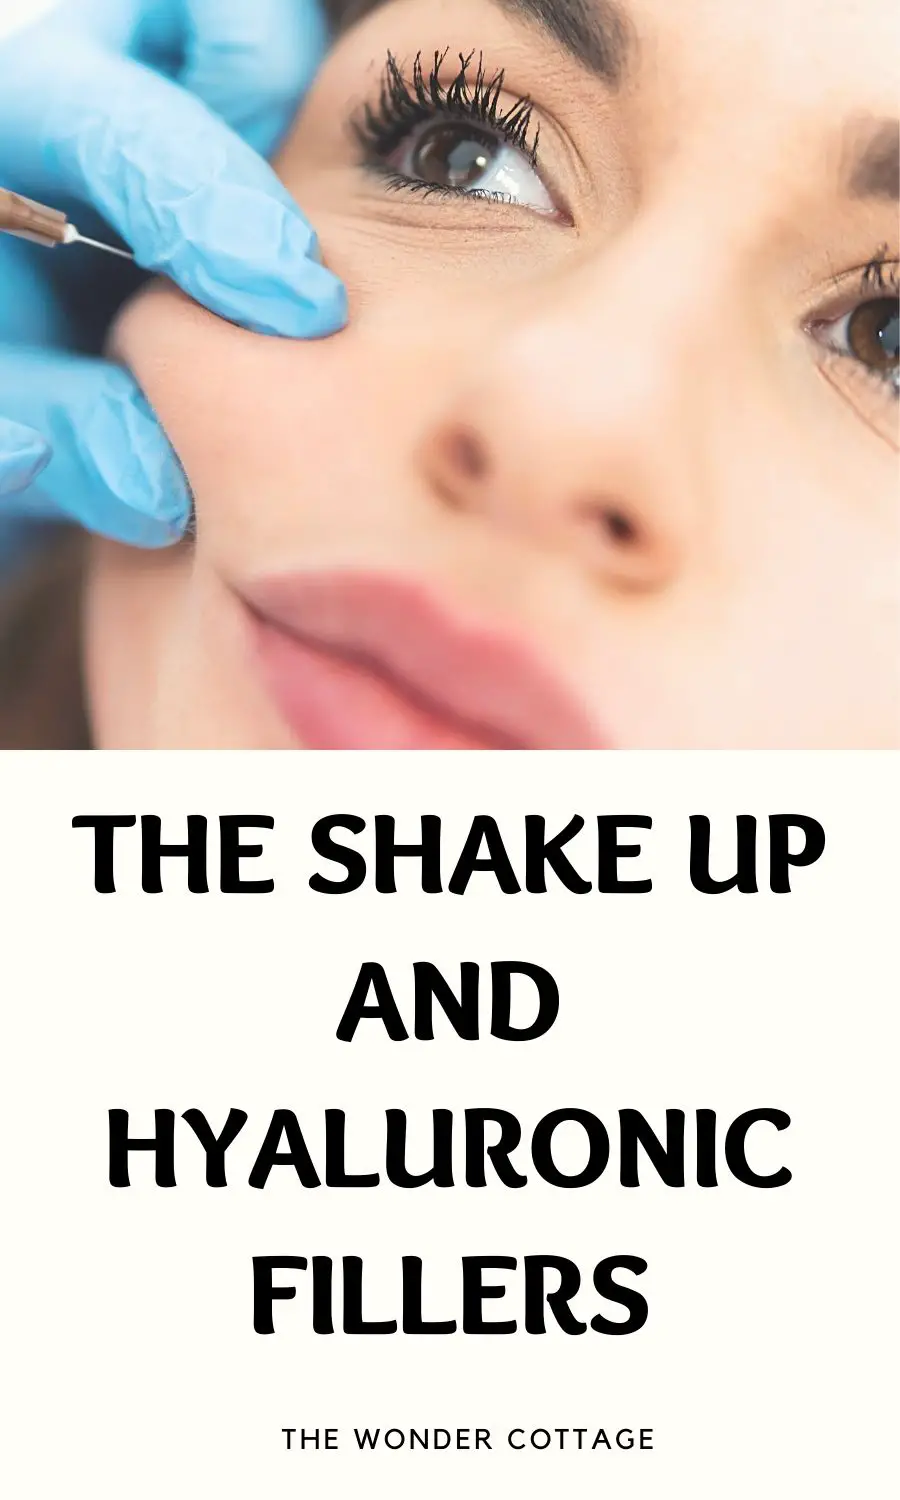 The Shake Up And Hyaluronic Fillers